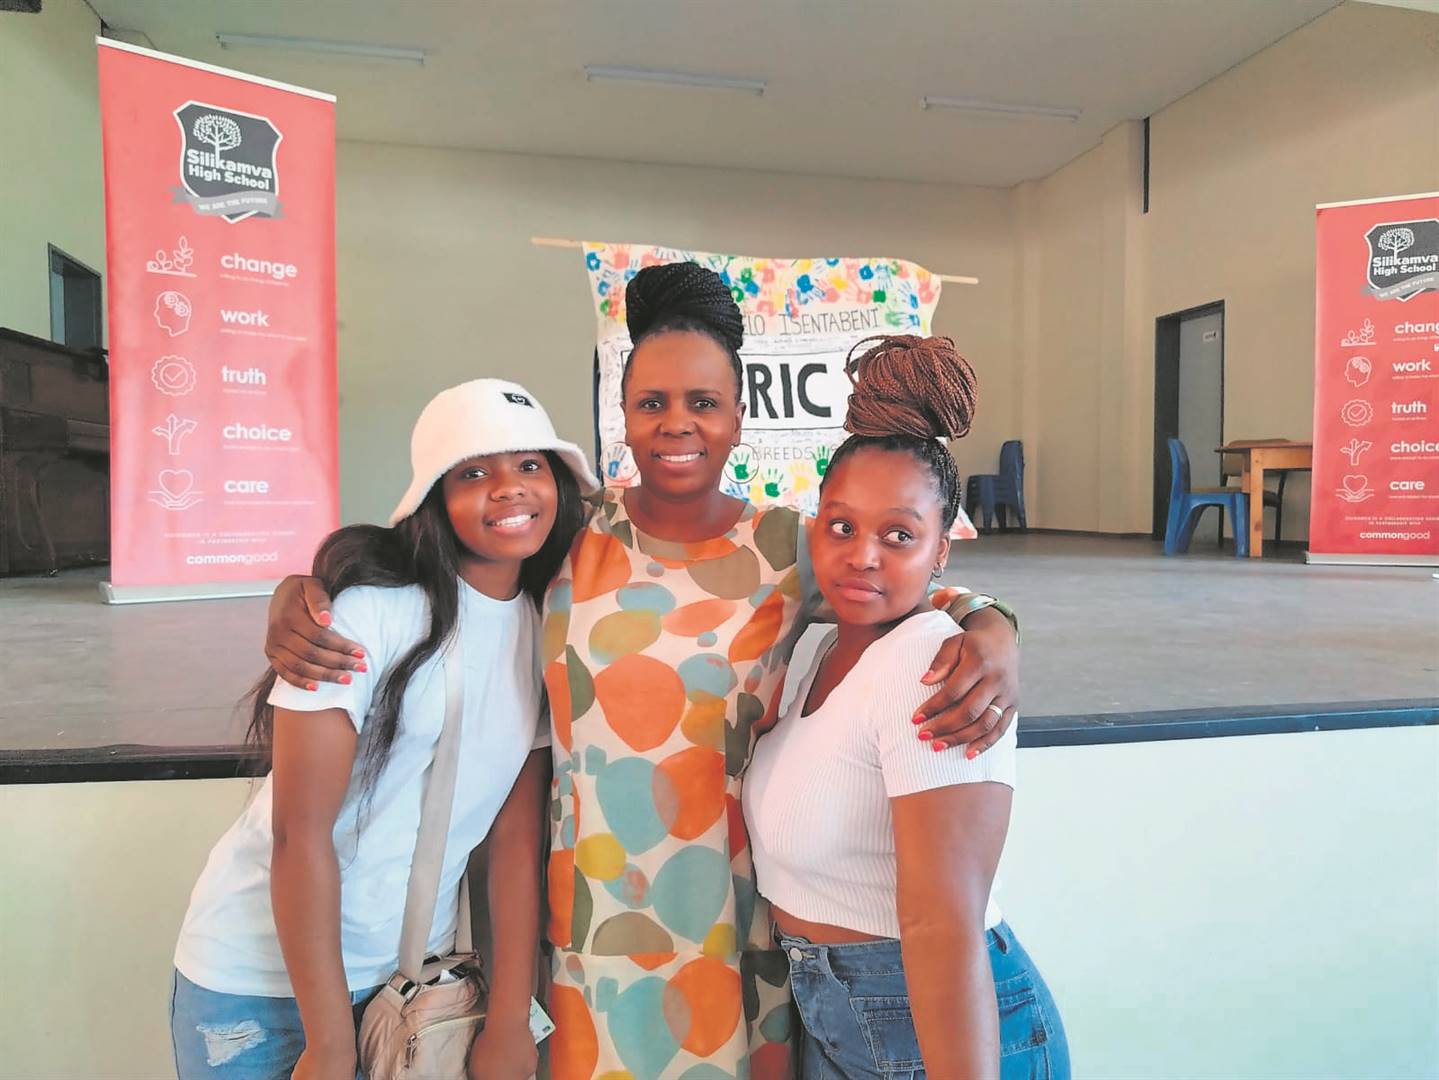 Principal Siphathisiwe Nkala-Nkohla (middle) is proud of Siphesihle Mpofu (left) who joined Silikamva in Grade 12 and passed matric with a bachelor despite home challenges, and is simply thrilled about Akhona Kayise’s achievement of three distinctions.PHOTO: Supplied